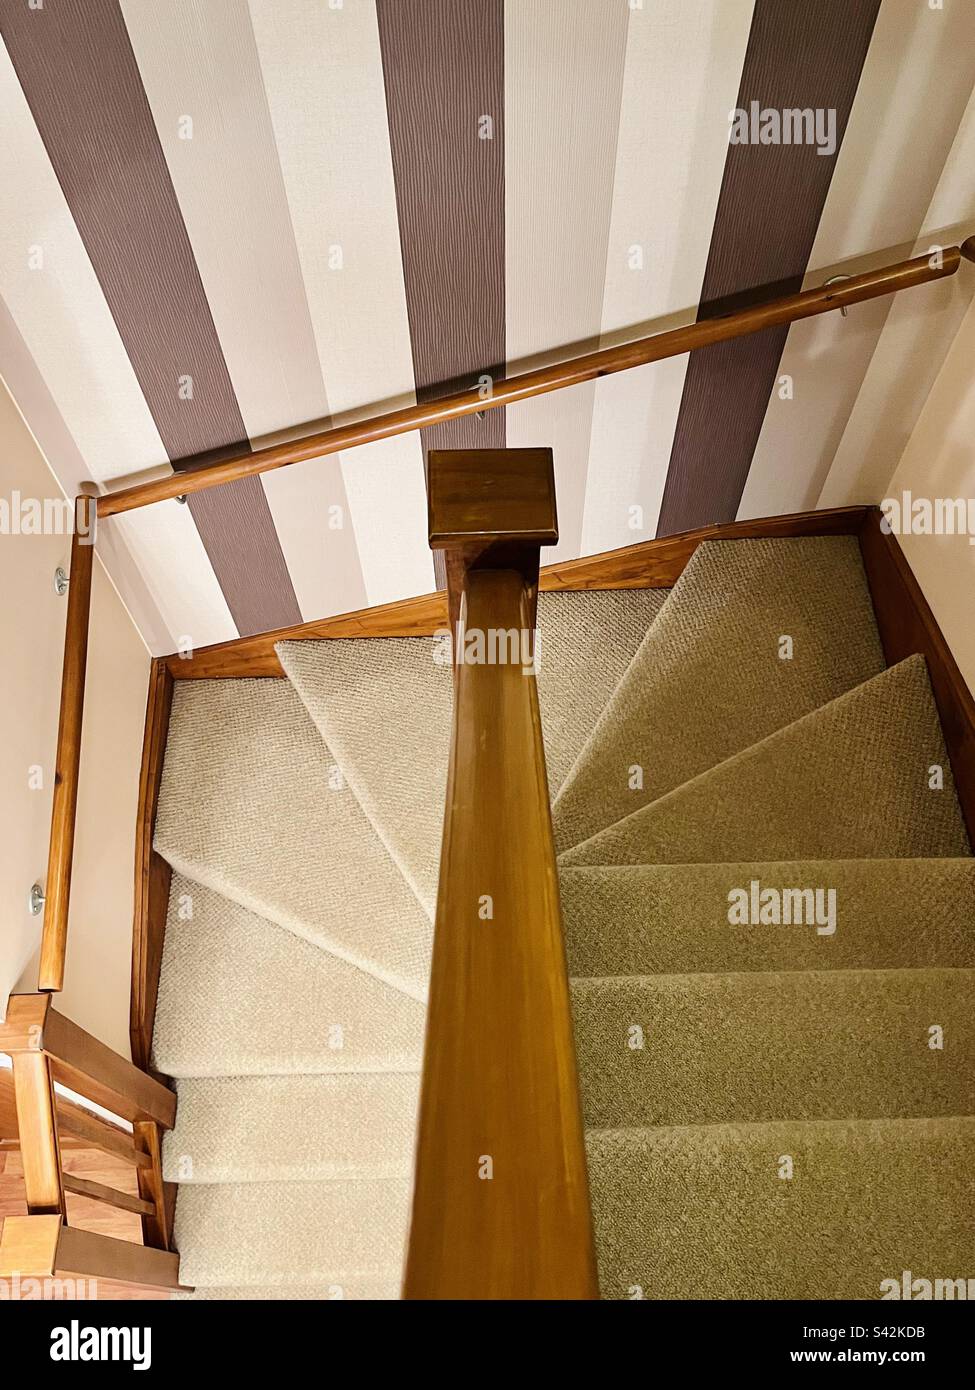 Stairwell with neutral carpet and striped wallpaper Stock Photo